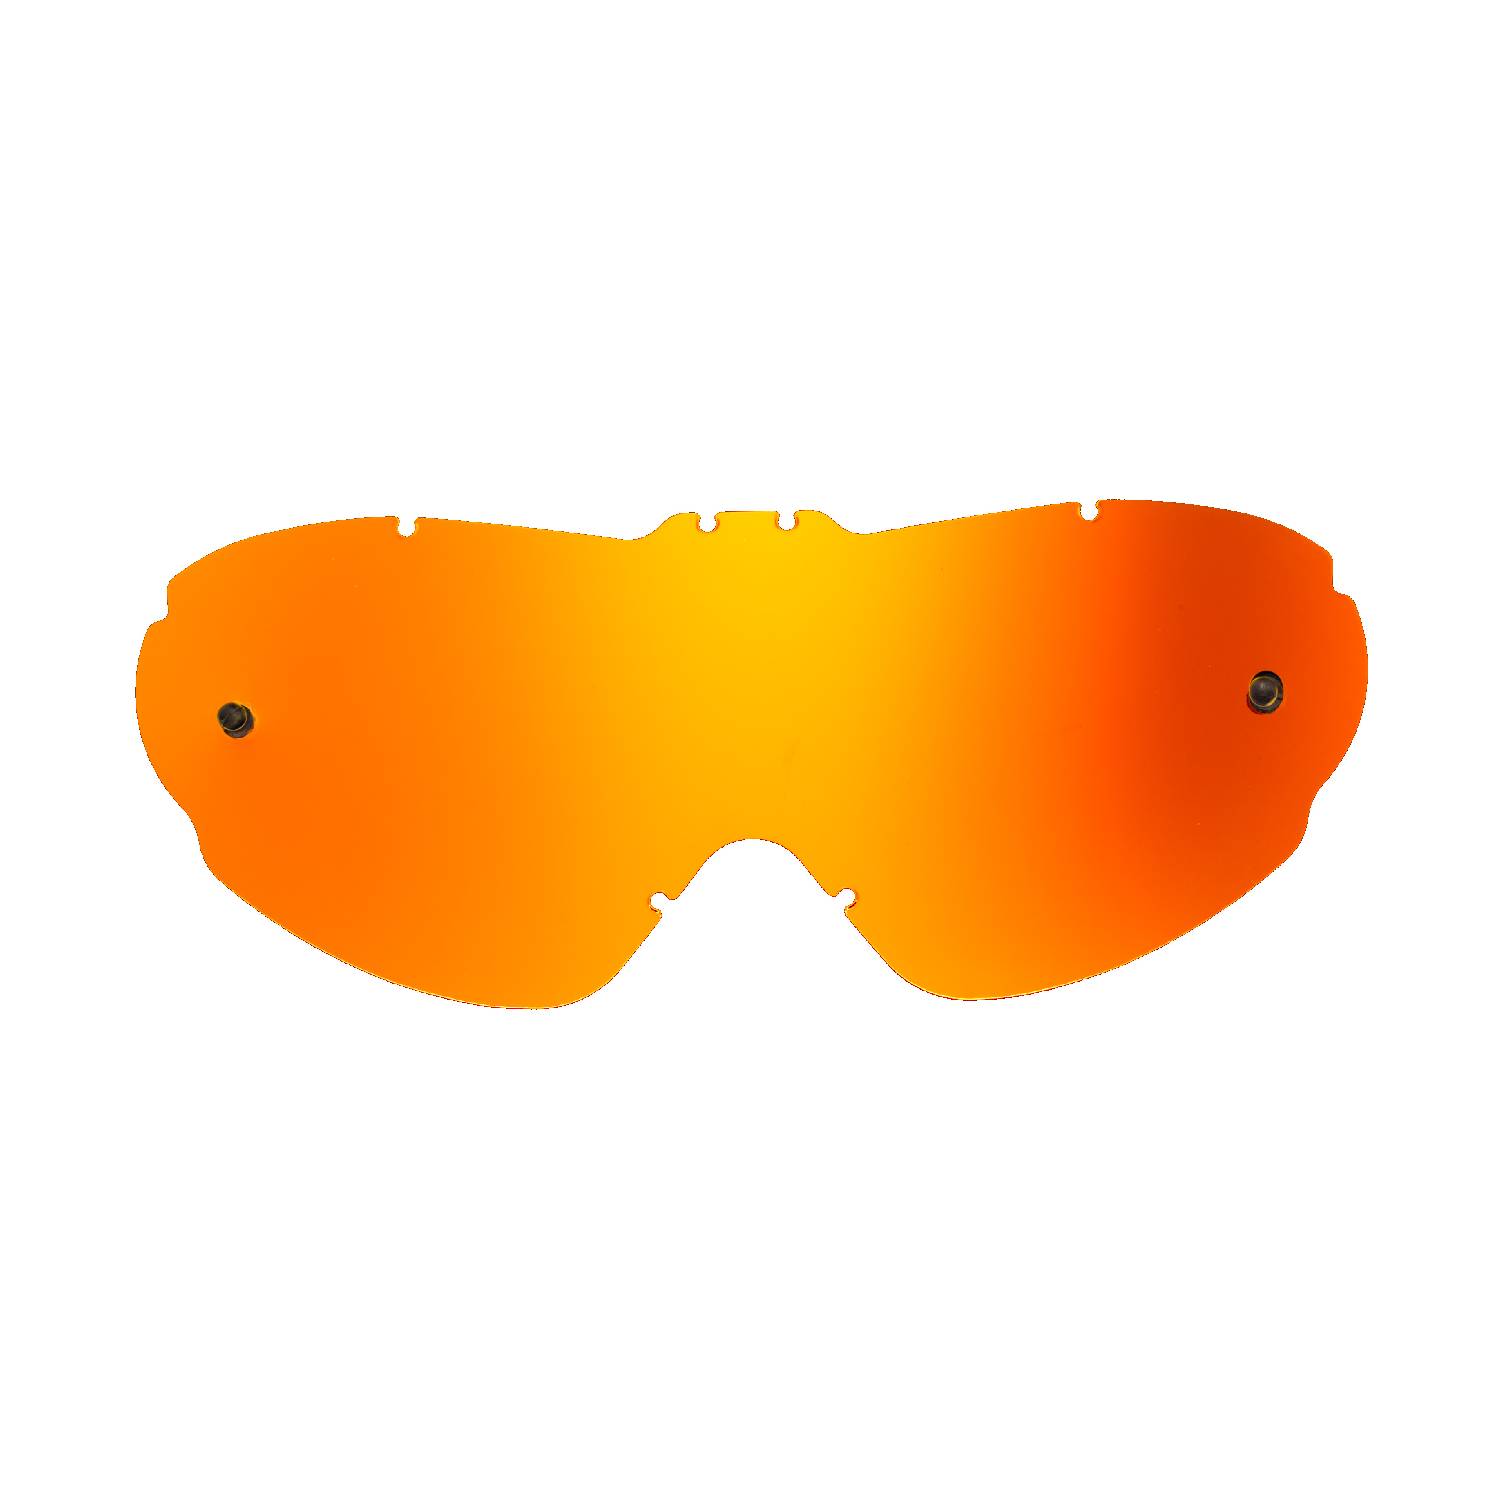 orange-toned mirrored replacement lenses for goggles compatible for Scott Hi voltage work goggle